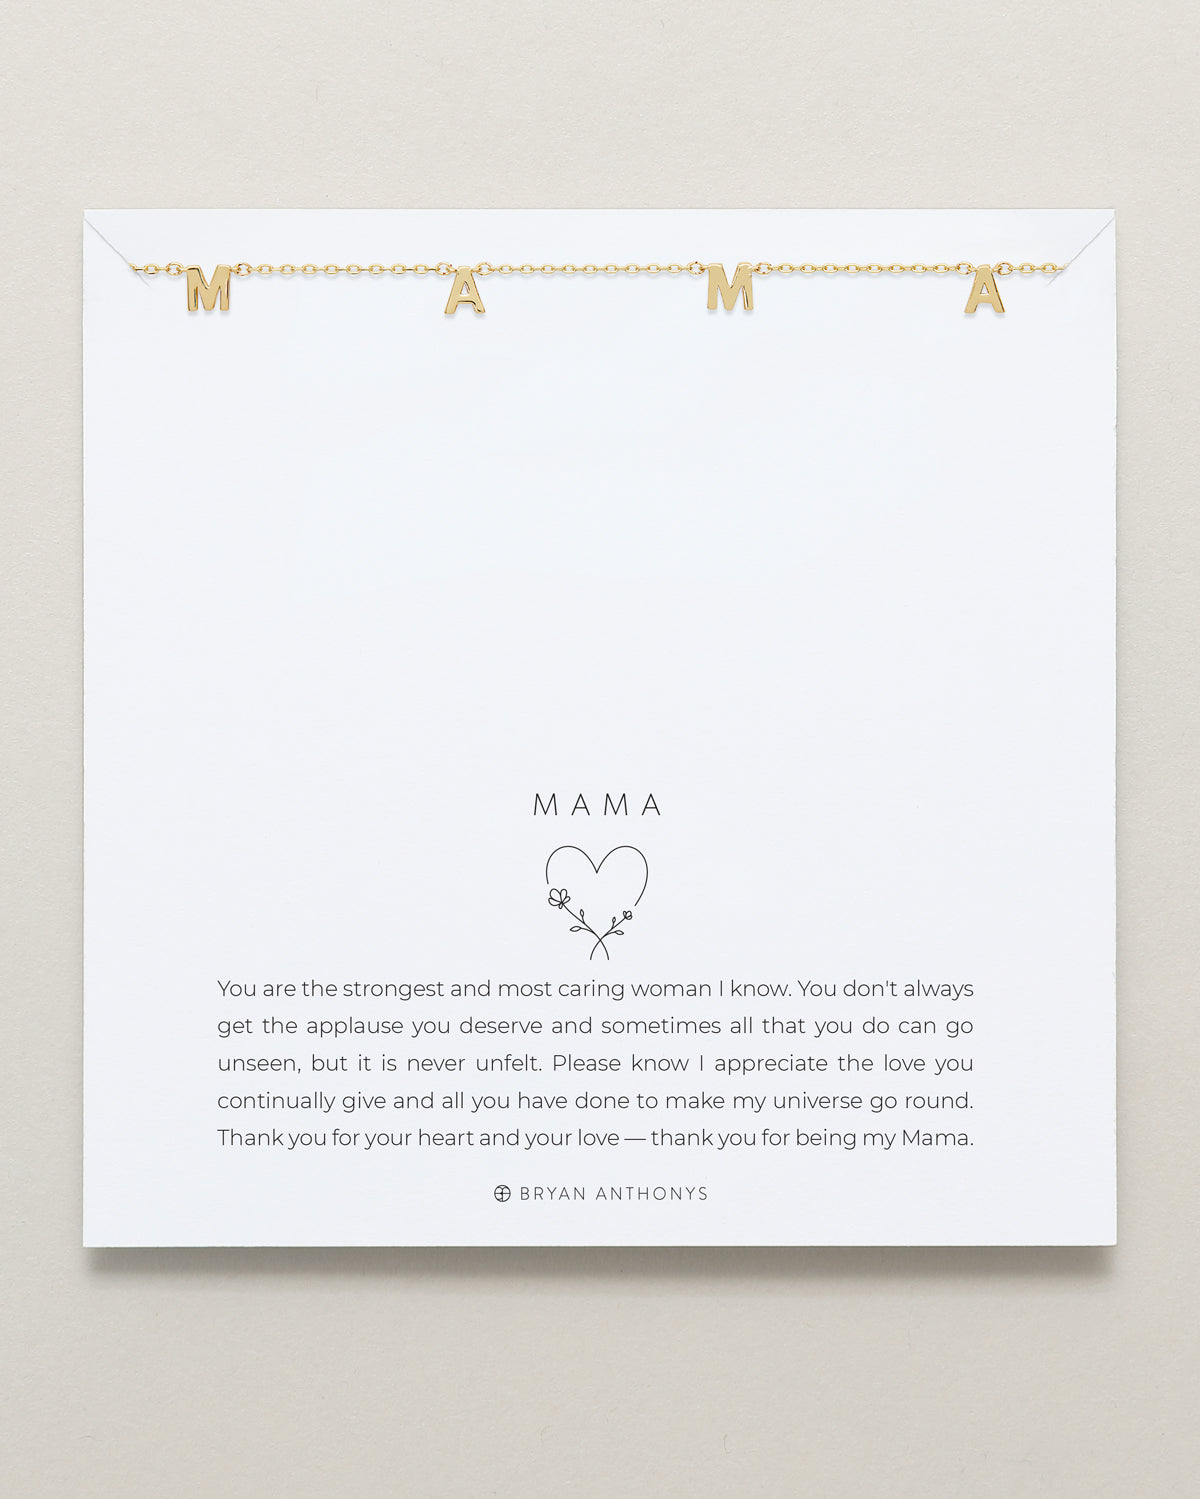 Bryan Anthonys Mama Gold Smooth Necklace On Card